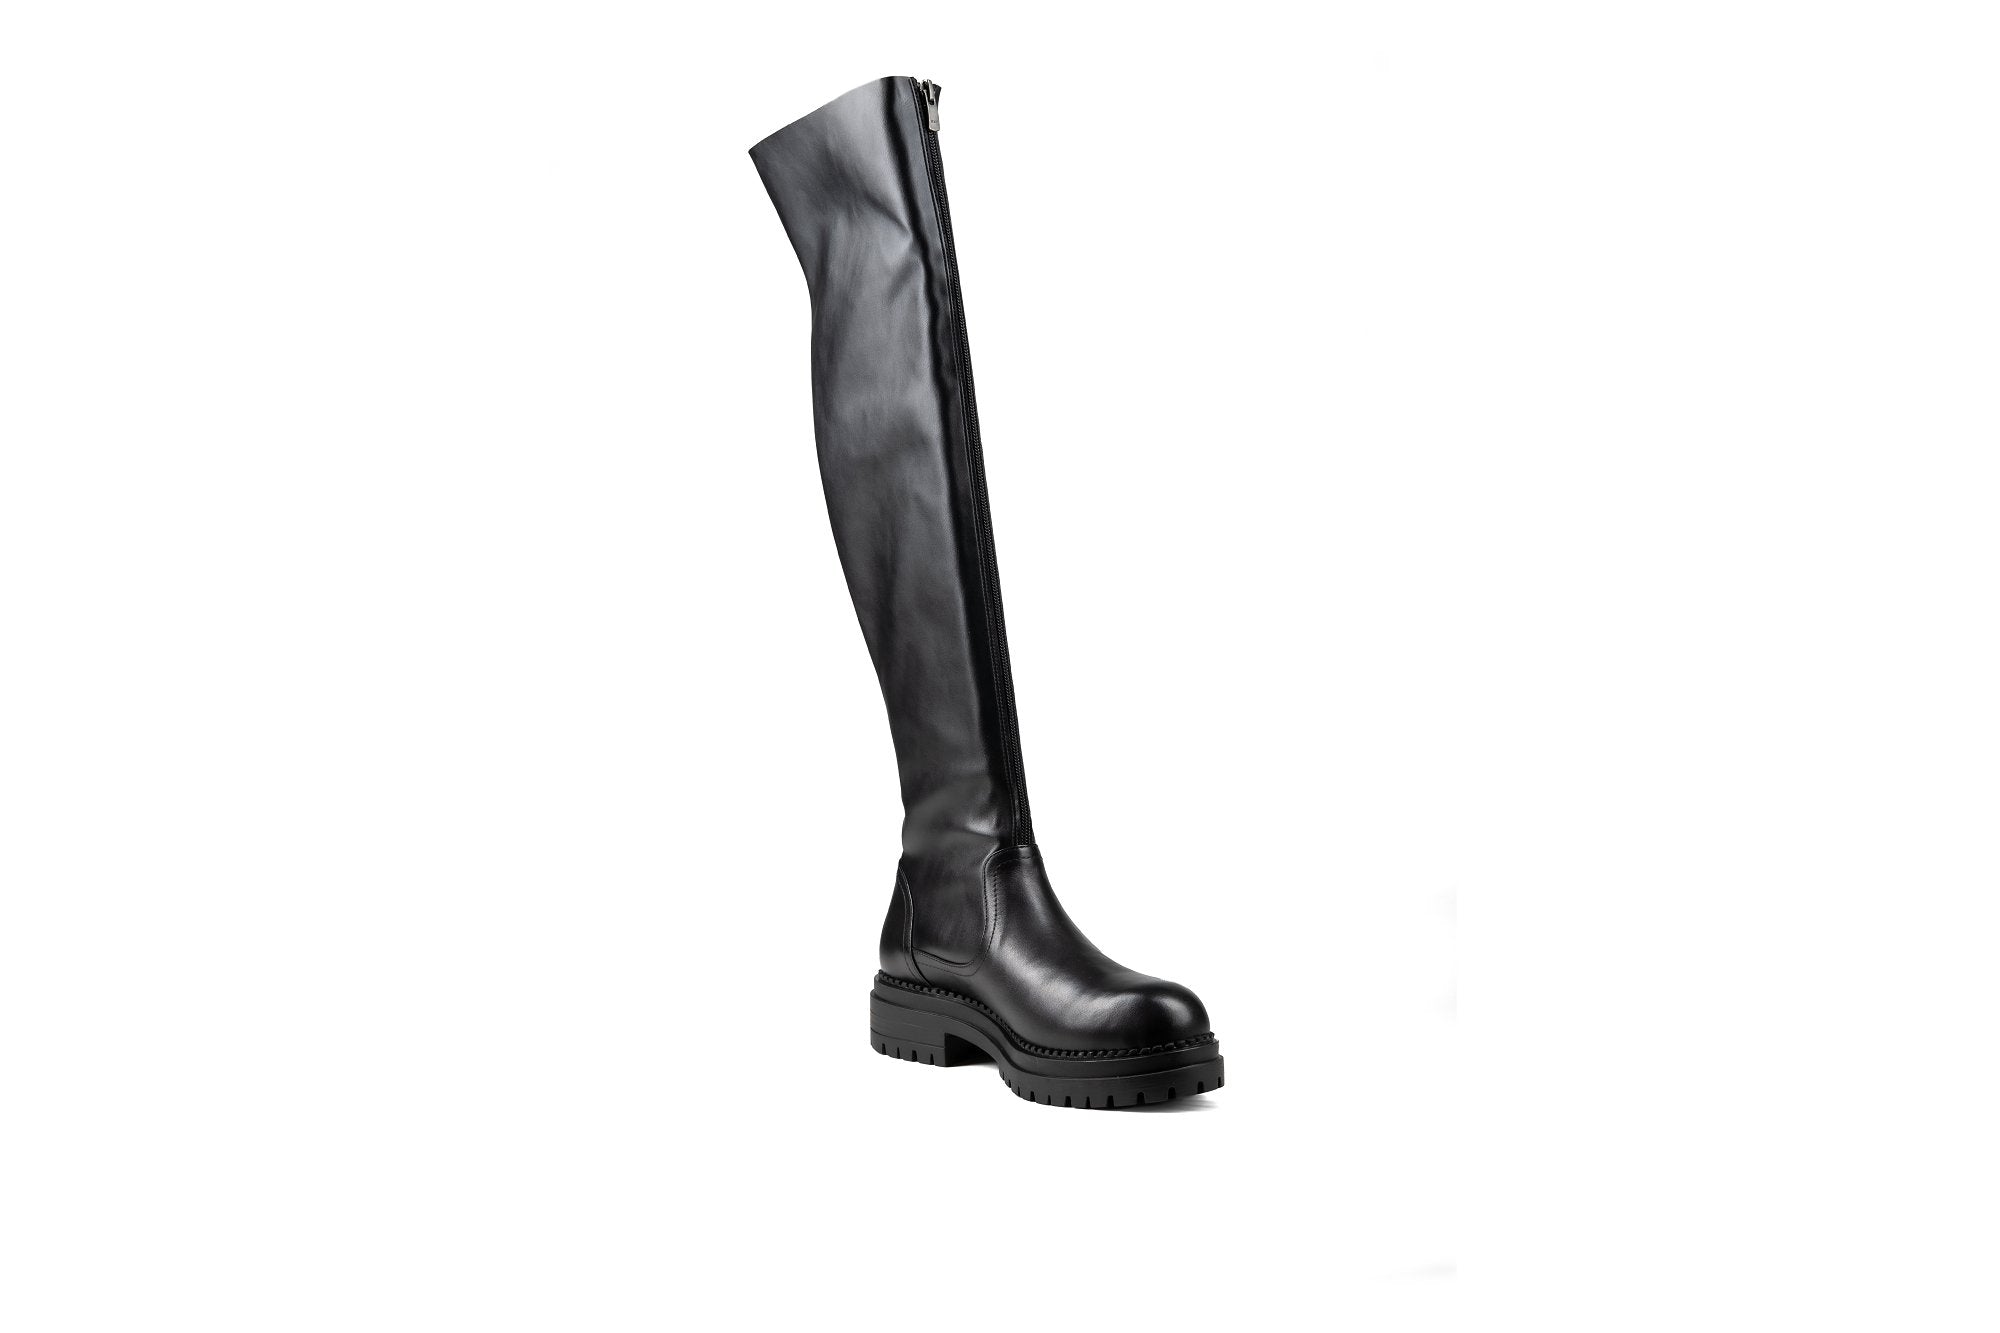 Chester Knee High Combat Boot Black Boots by Sole Shoes NZ LB5-36W